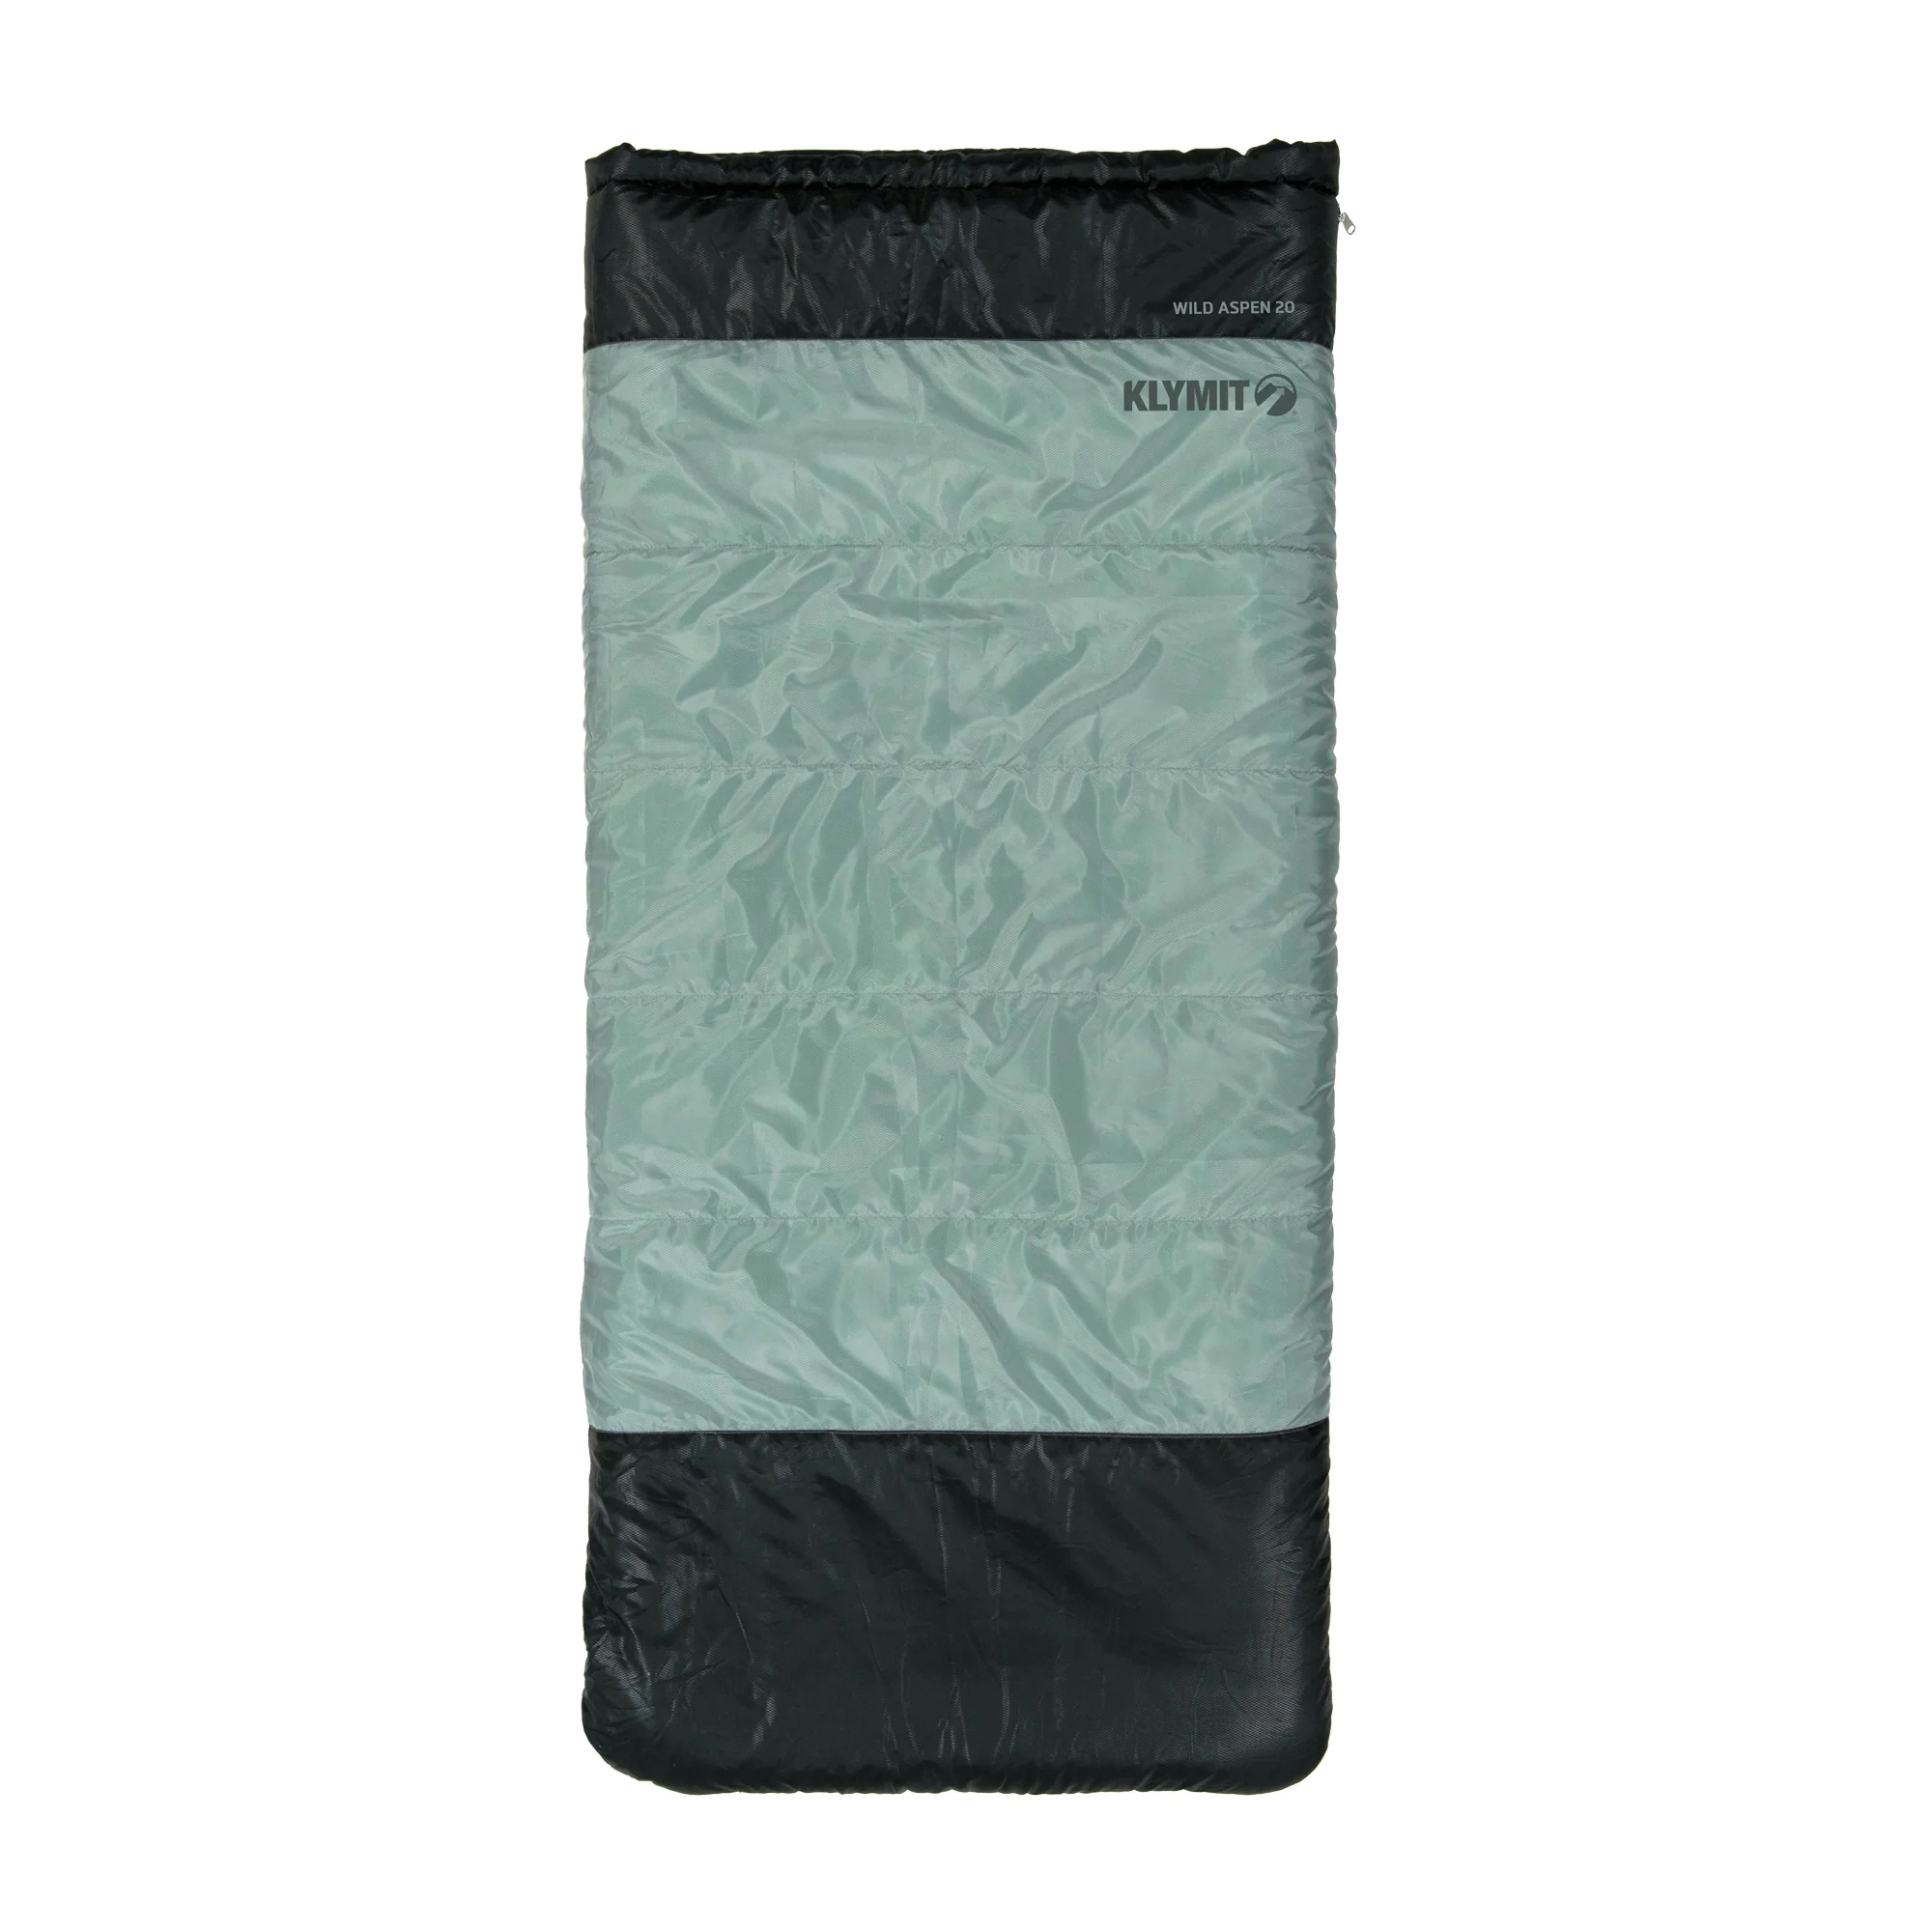 Klymit Wold Aspen 20 13WRGR20D Sleeping Bag, 74 in L, 34 in W, Rectangle, Polyester, Green - 1